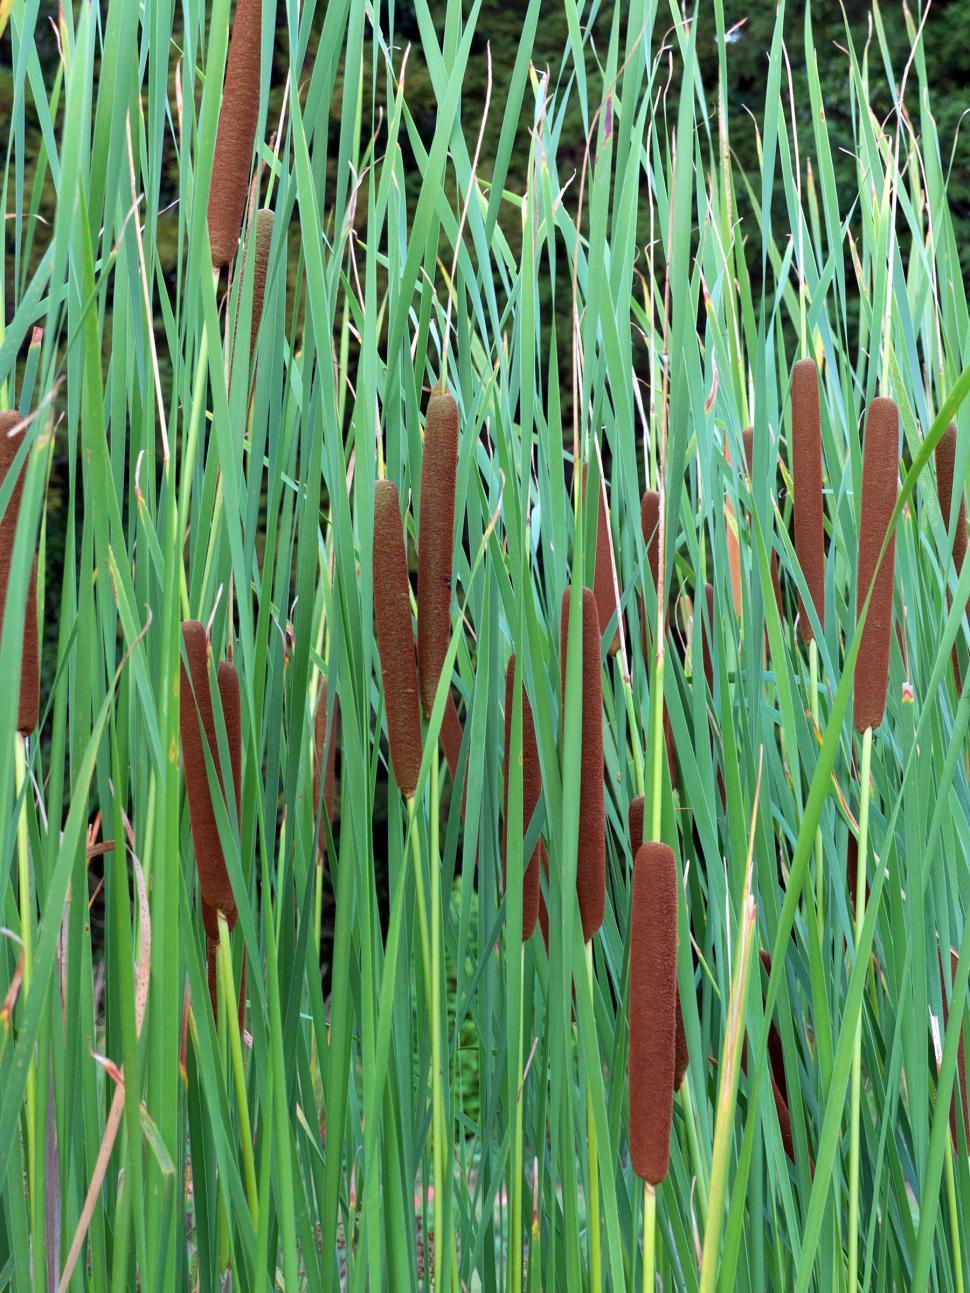 Free Image of Cat Tail Plants 